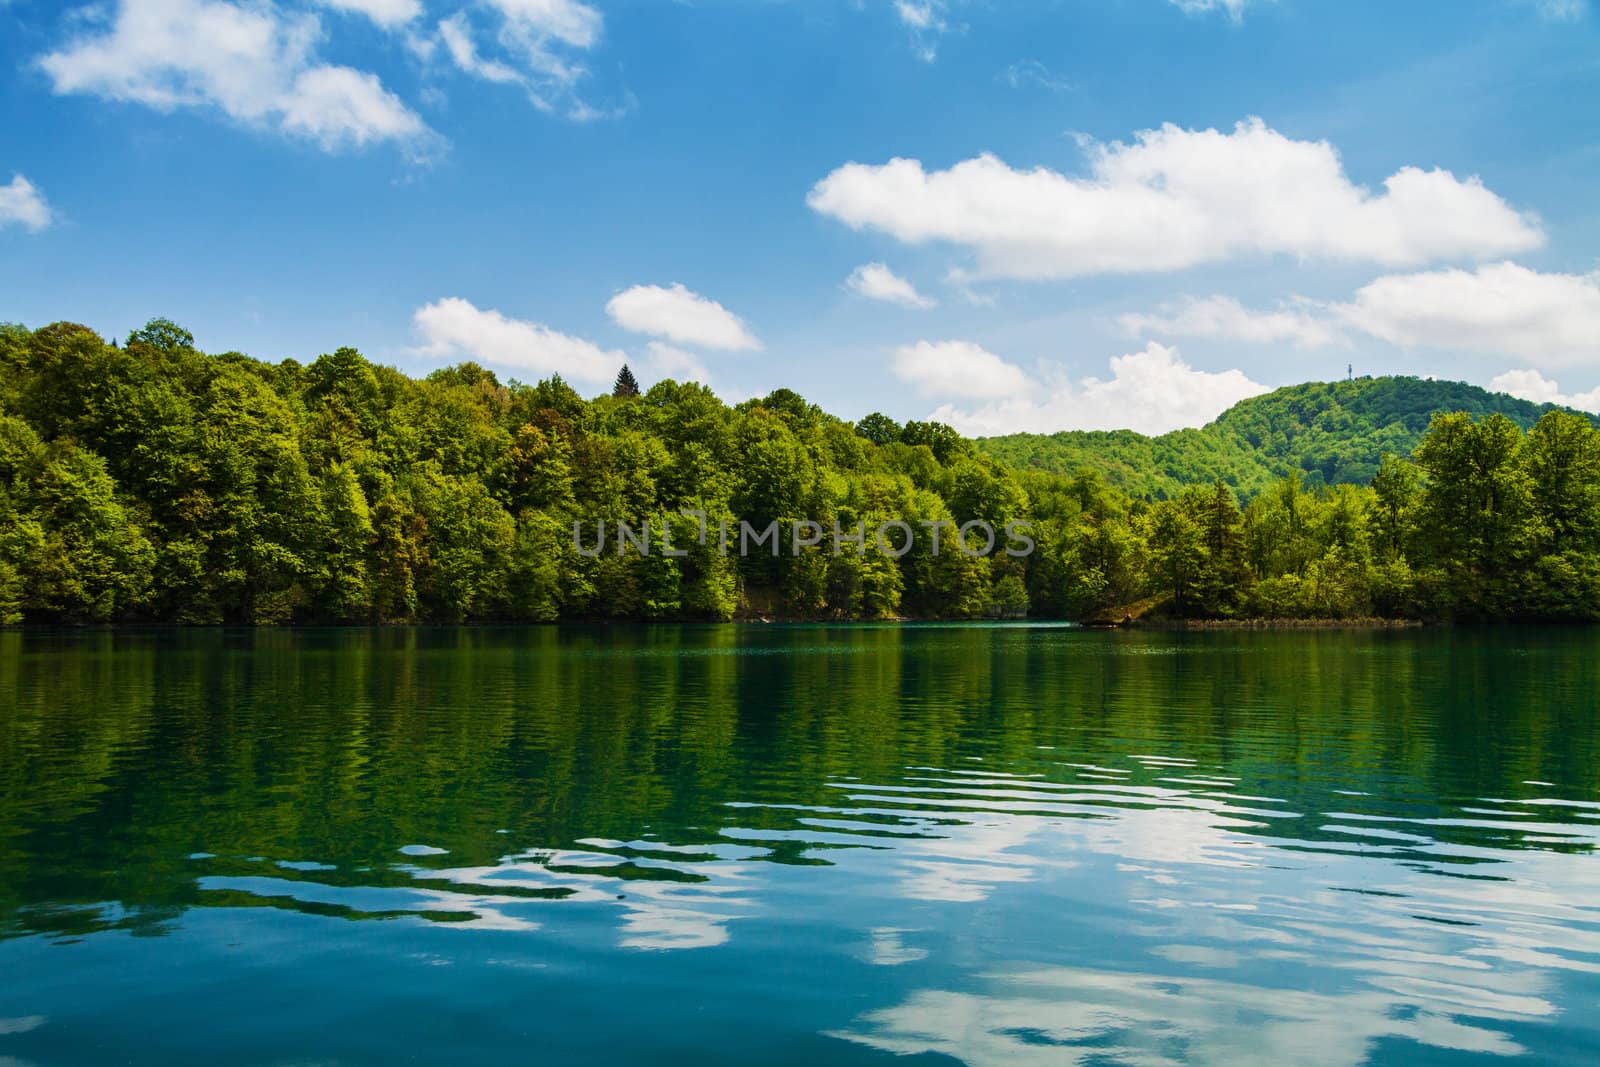 Forest and clouds with reflection in a calm lake by Lamarinx